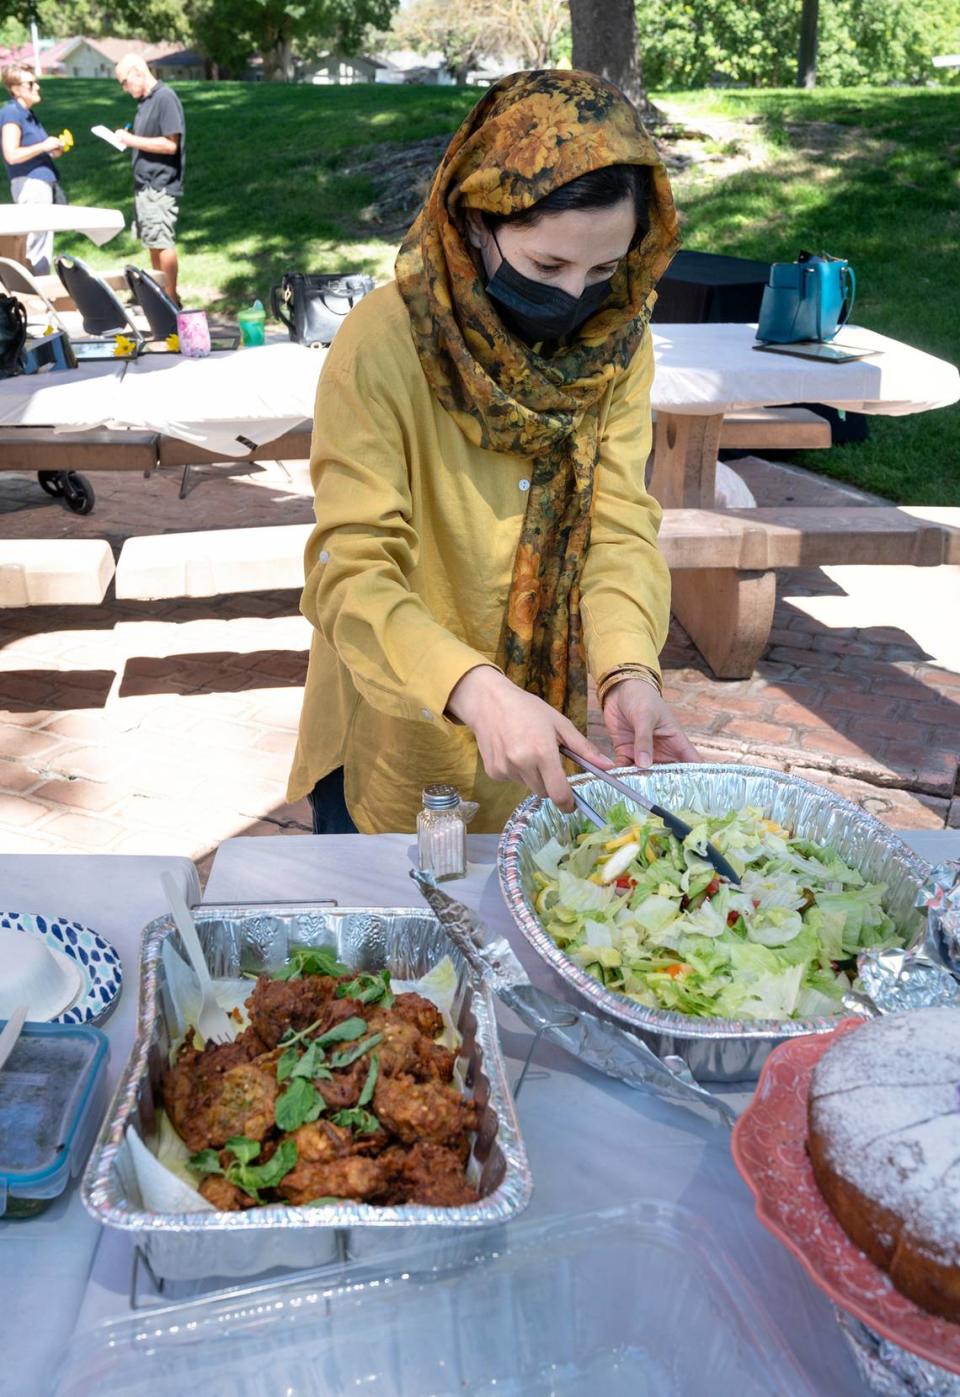 Estori Afzali serves up some traditional Afghan food during a potluck lunch after a graduation ceremony at Davis Park in Modesto Calif., on Friday, July 1, 2022. Seventeen women refugees from Afghanistan are the first graduates of the International Rescue Committee and Modesto Junior College’s child care microenterprise development program for home child-care licensing.